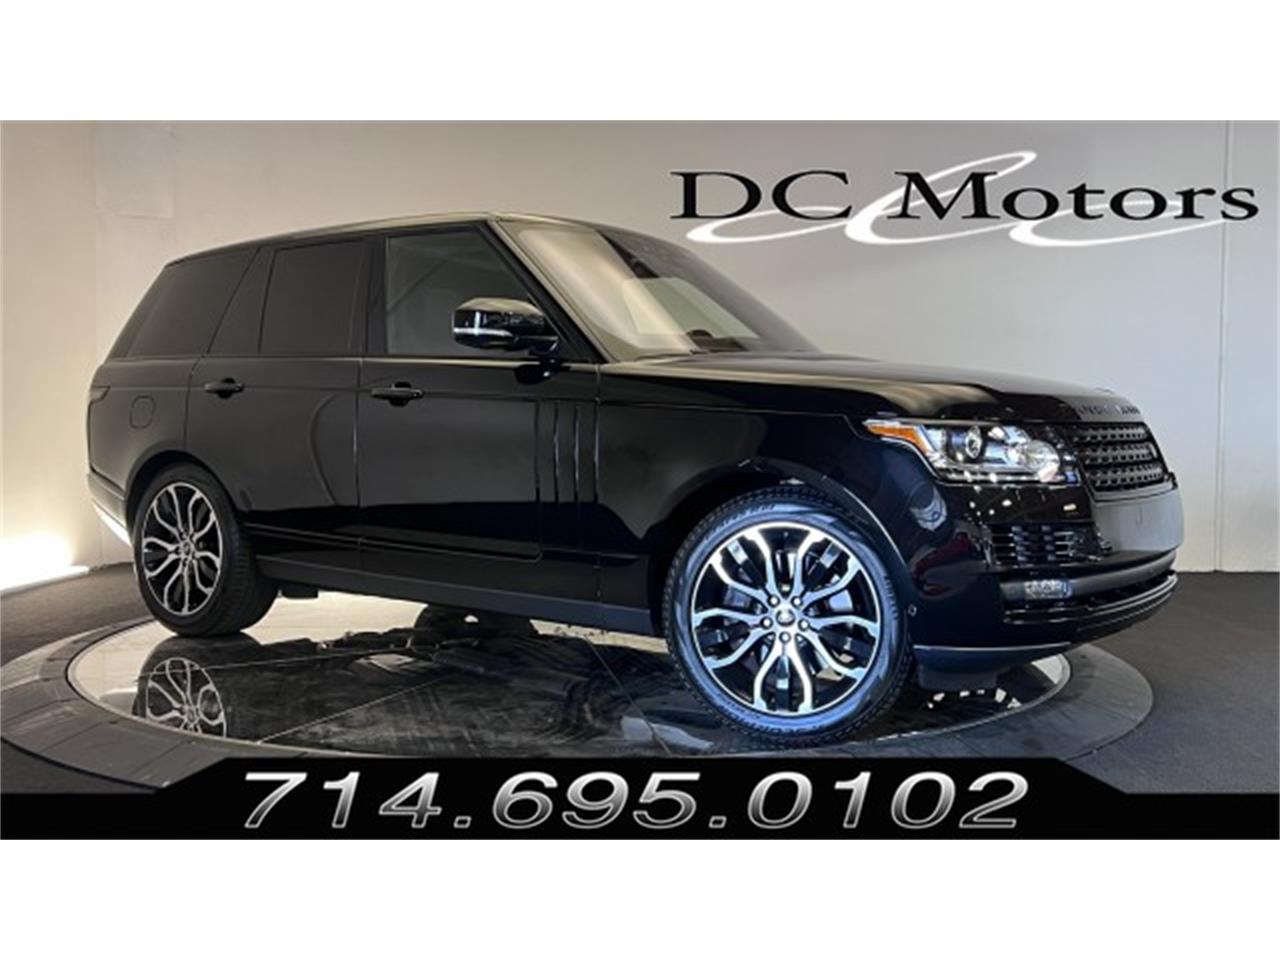 For Sale: 2017 Land Rover Range Rover in Anaheim, California for sale in Anaheim, CA